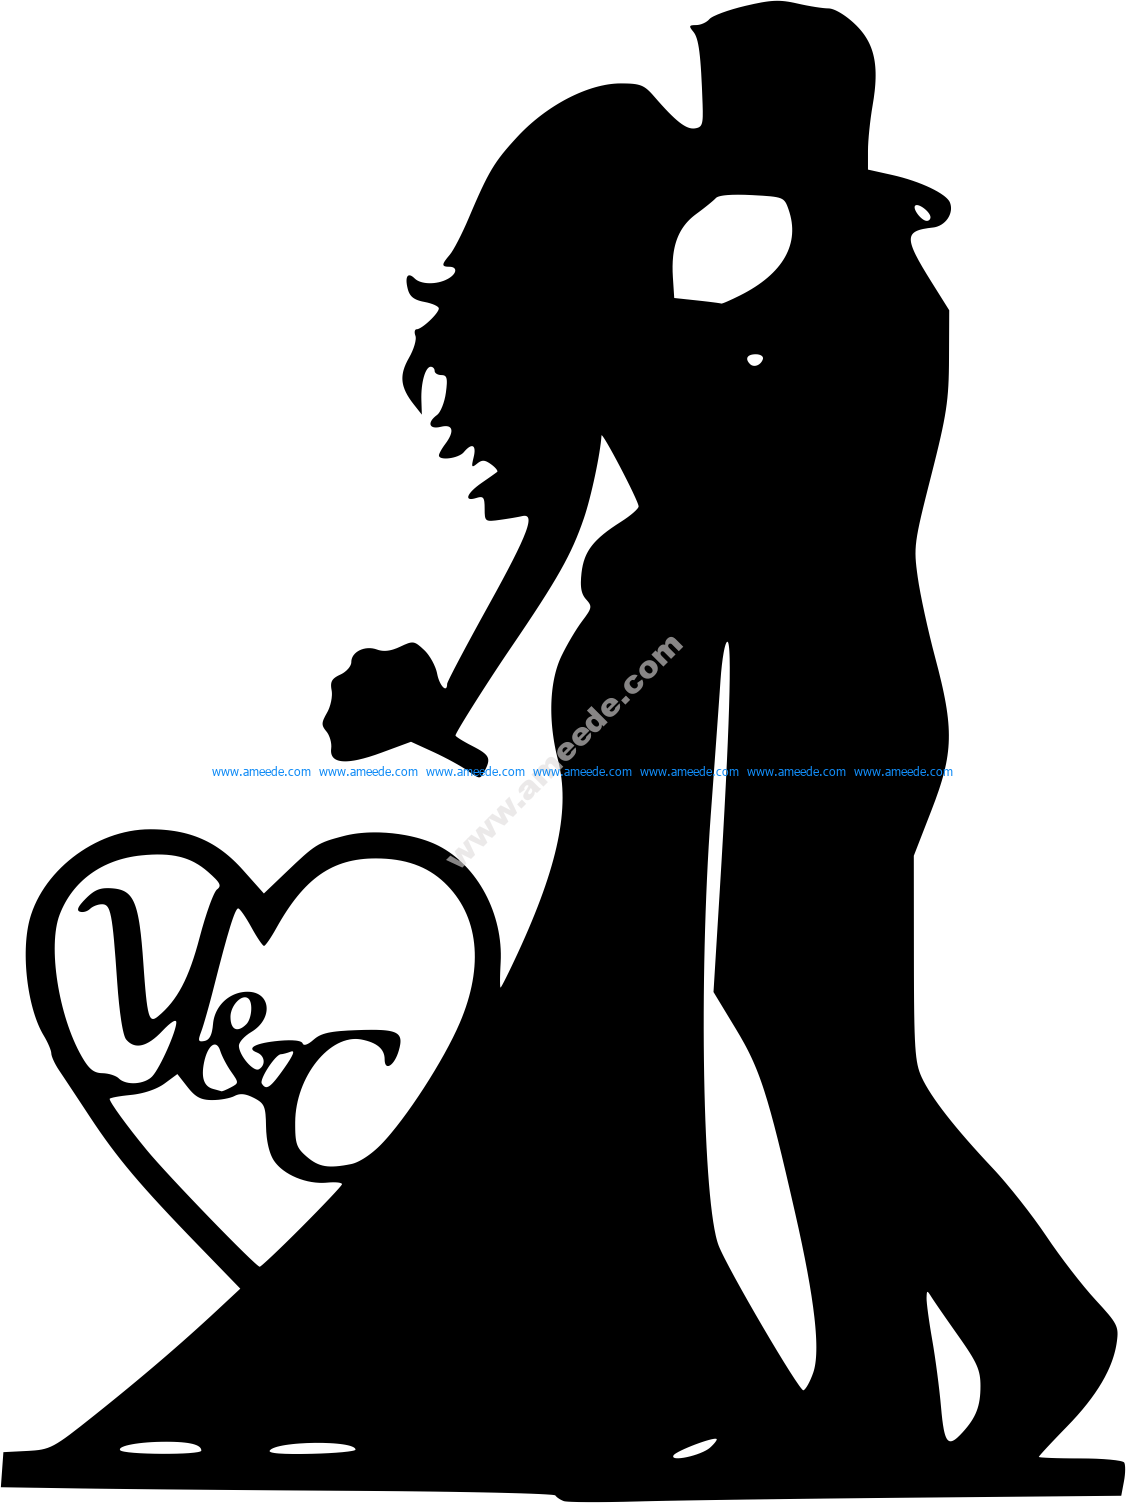 Mr and Mrs Silhouette Black Bride and Groom Vector